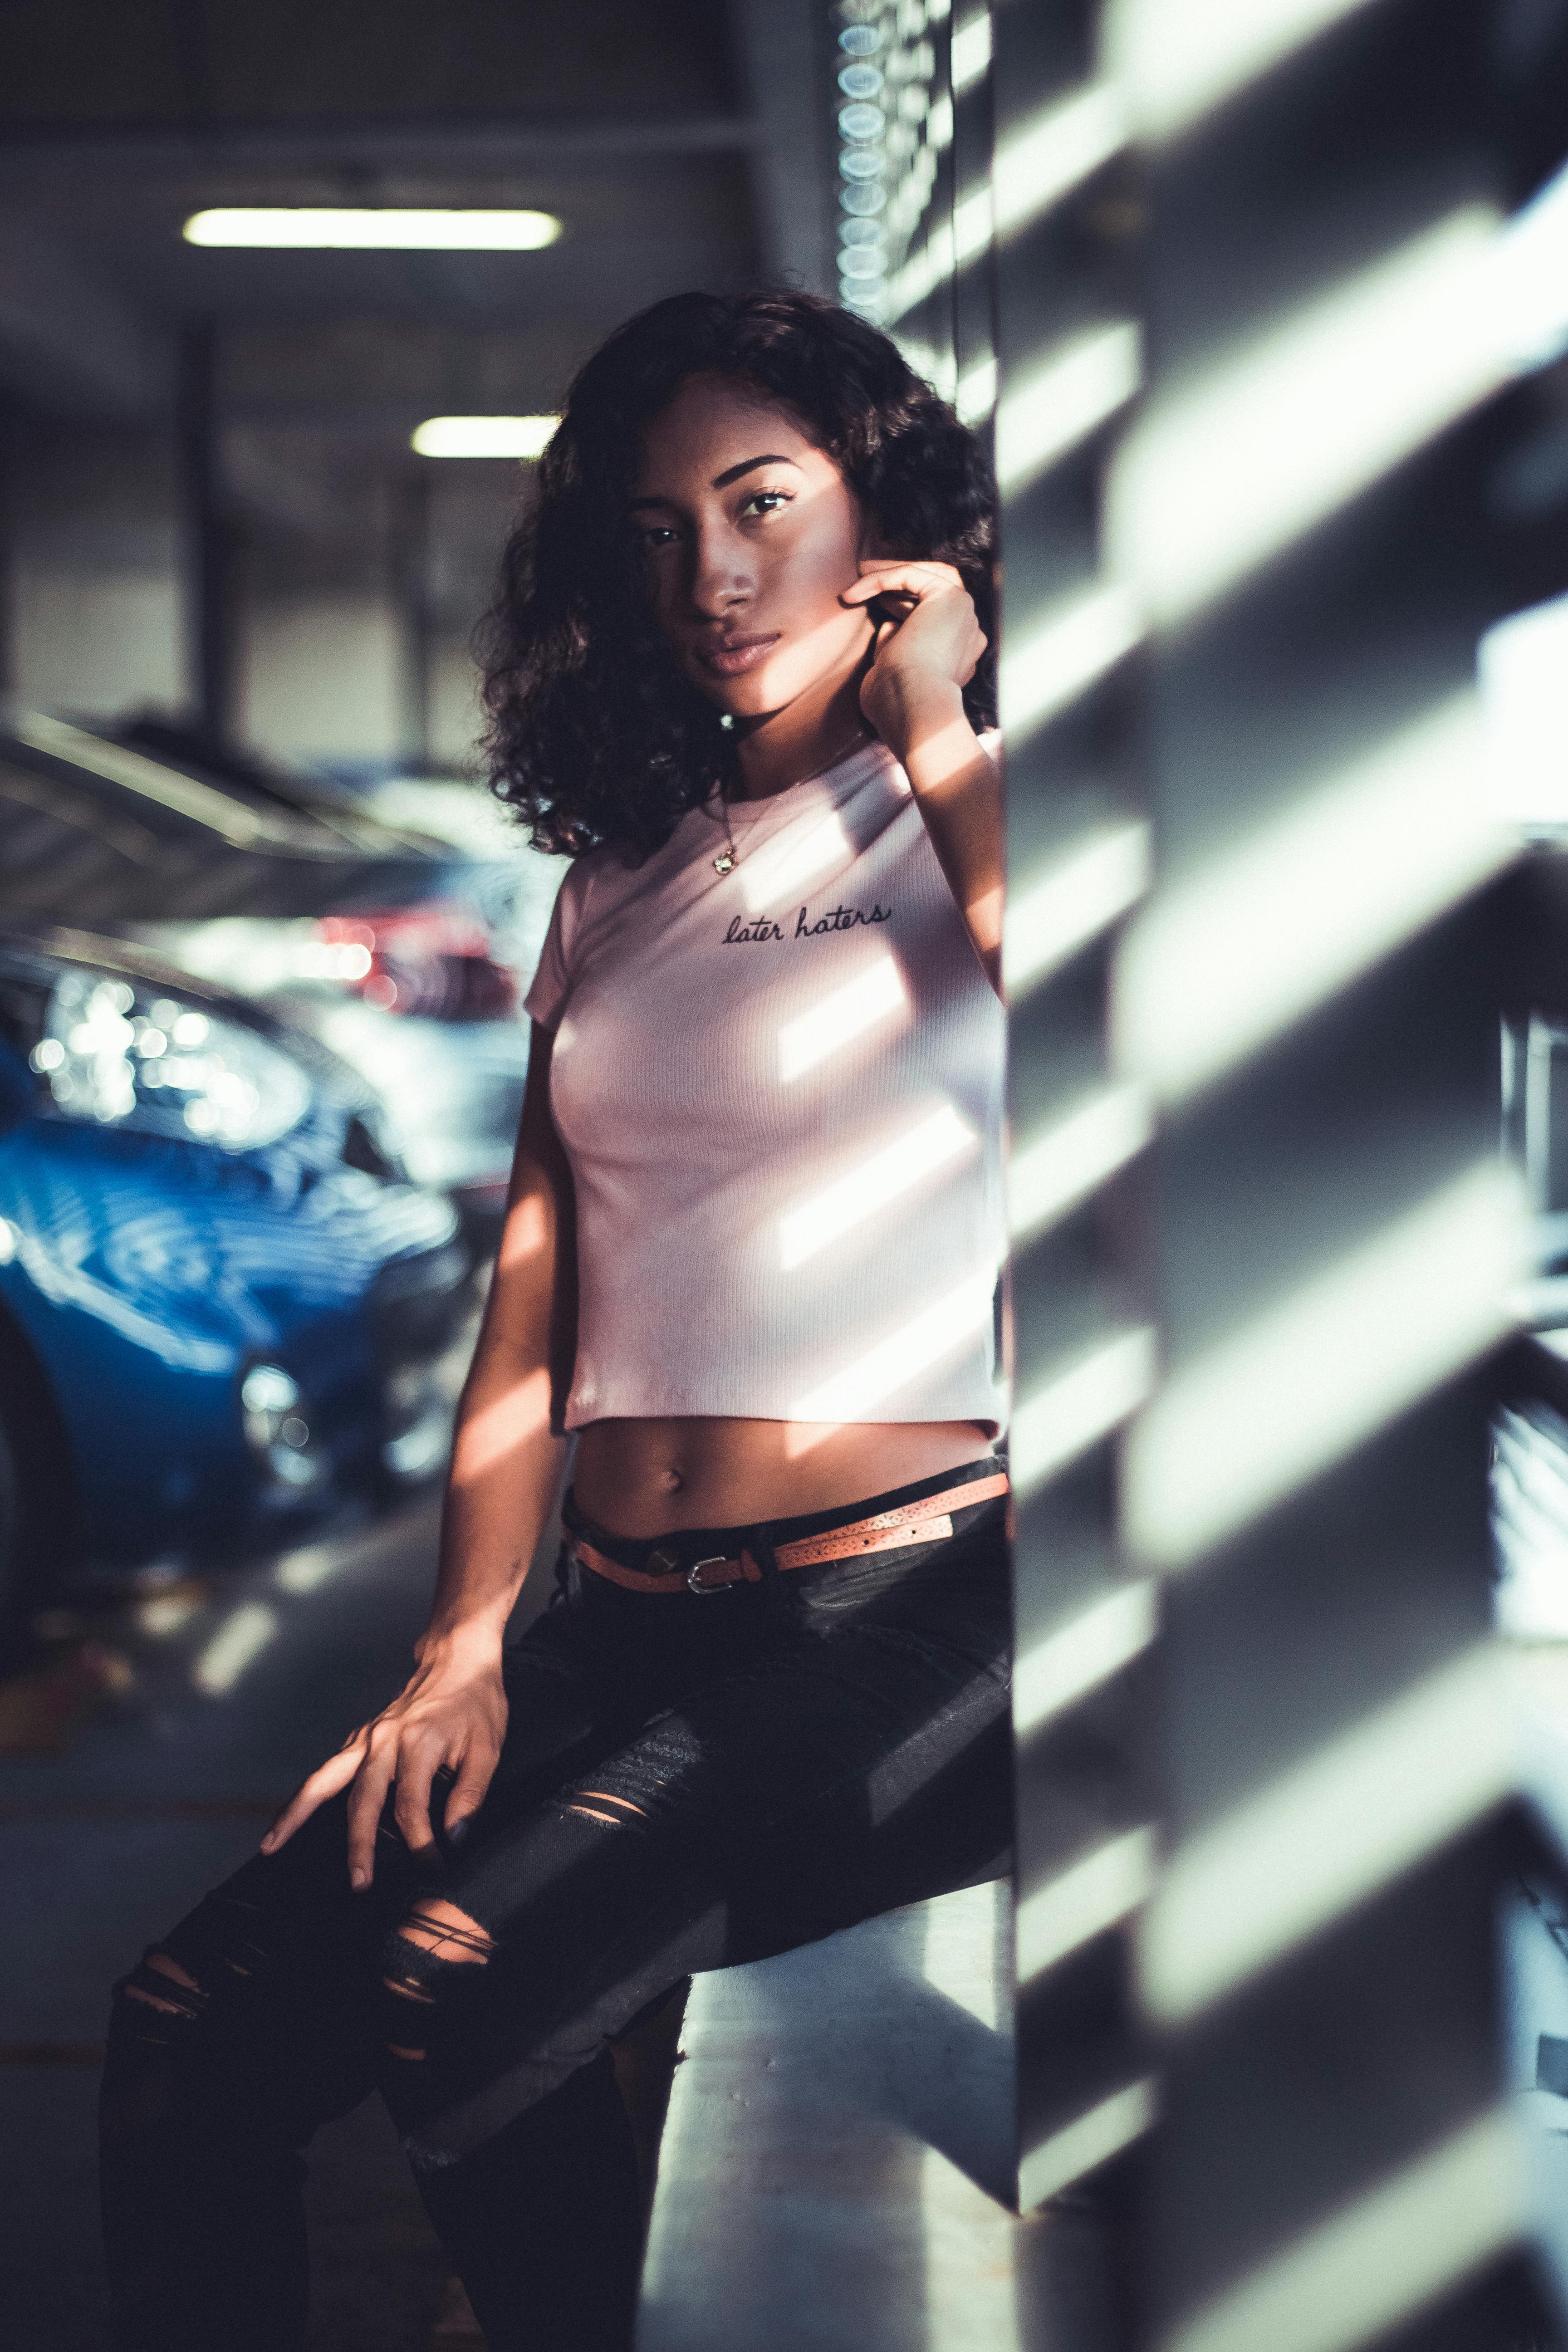 A woman in a crop top and jeans poses for a photo · Free Stock Photo